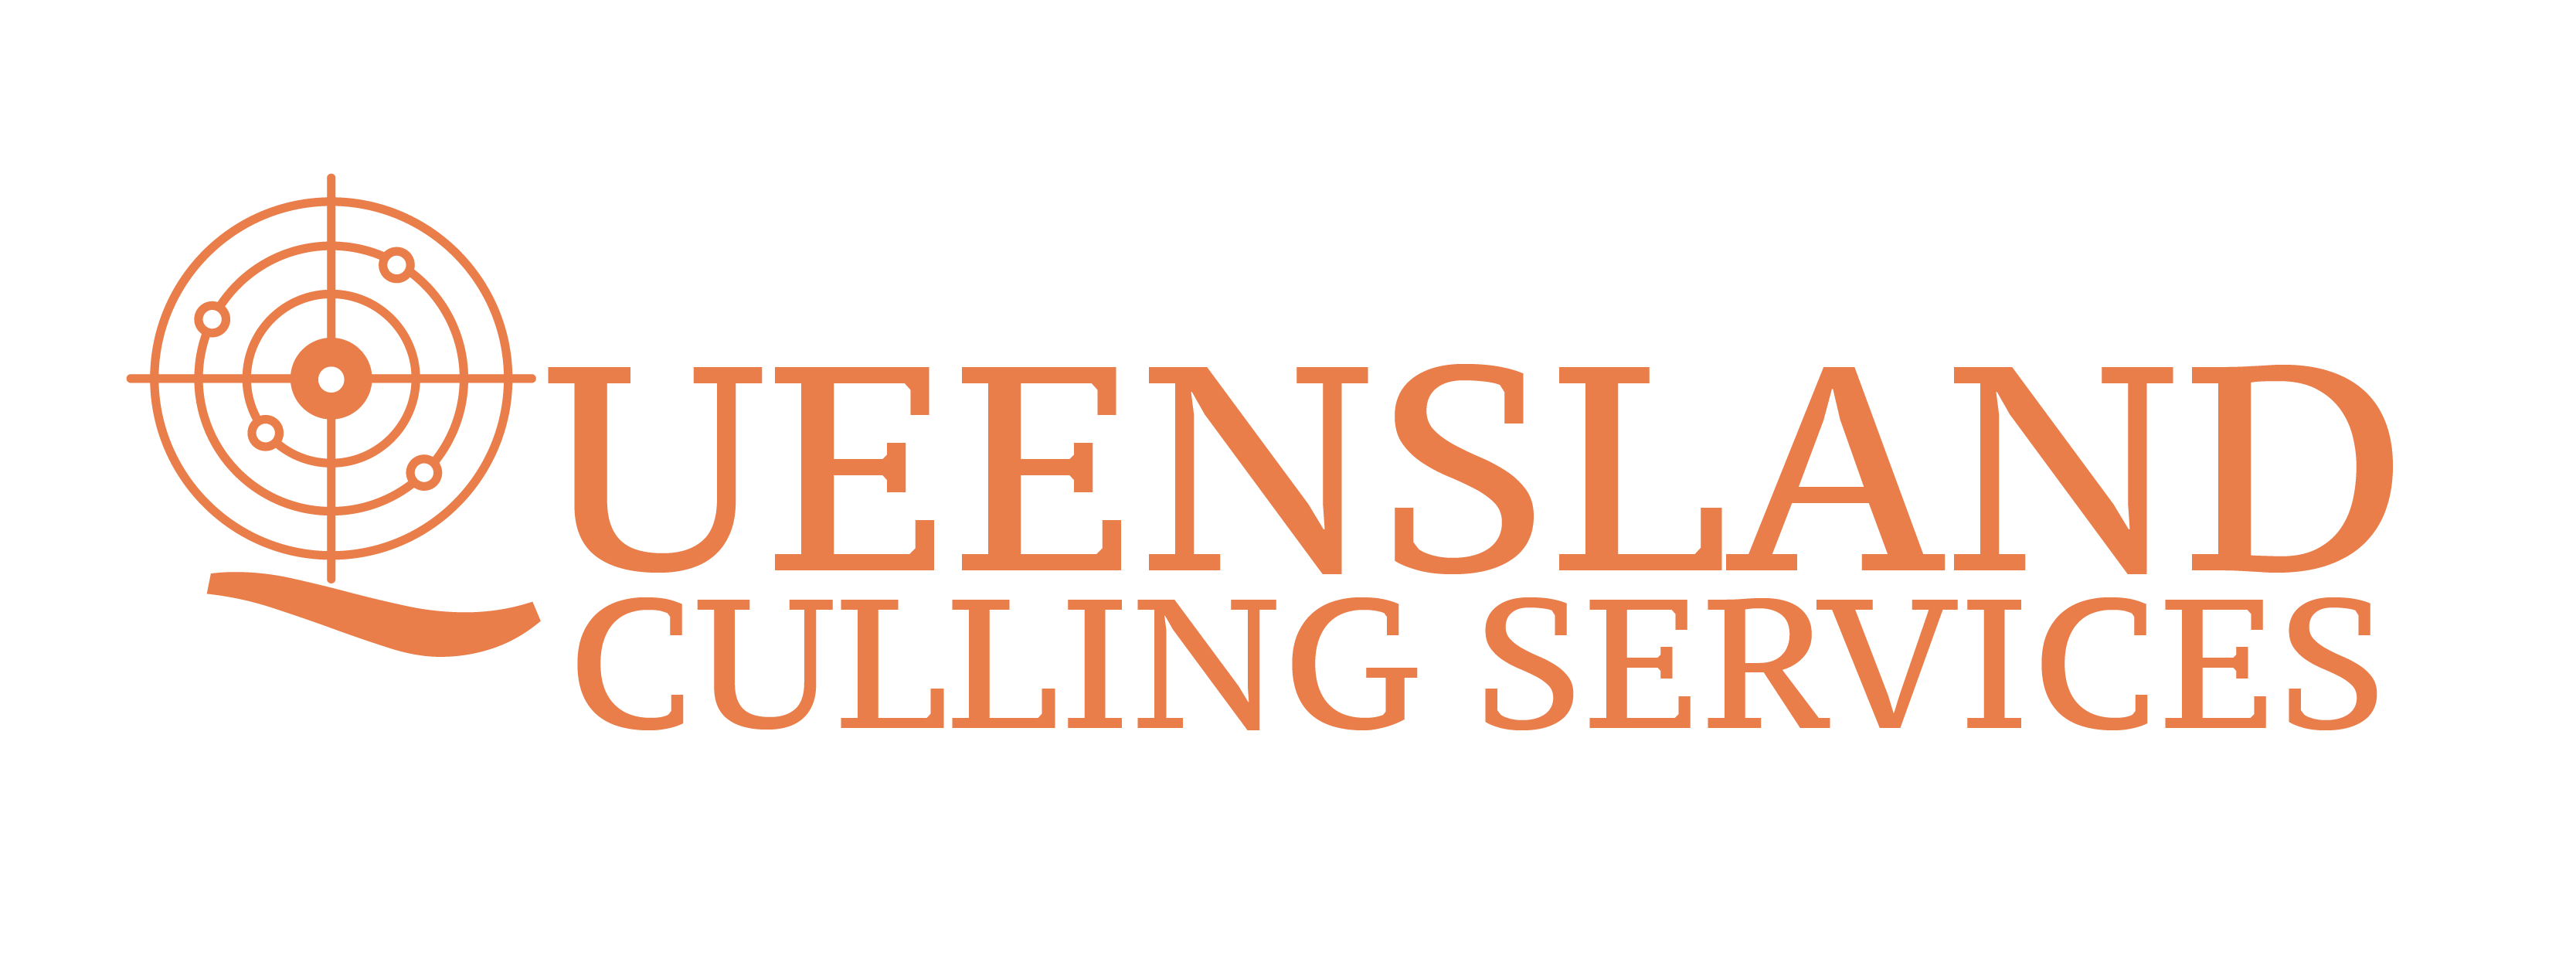 Queensland Culling Services